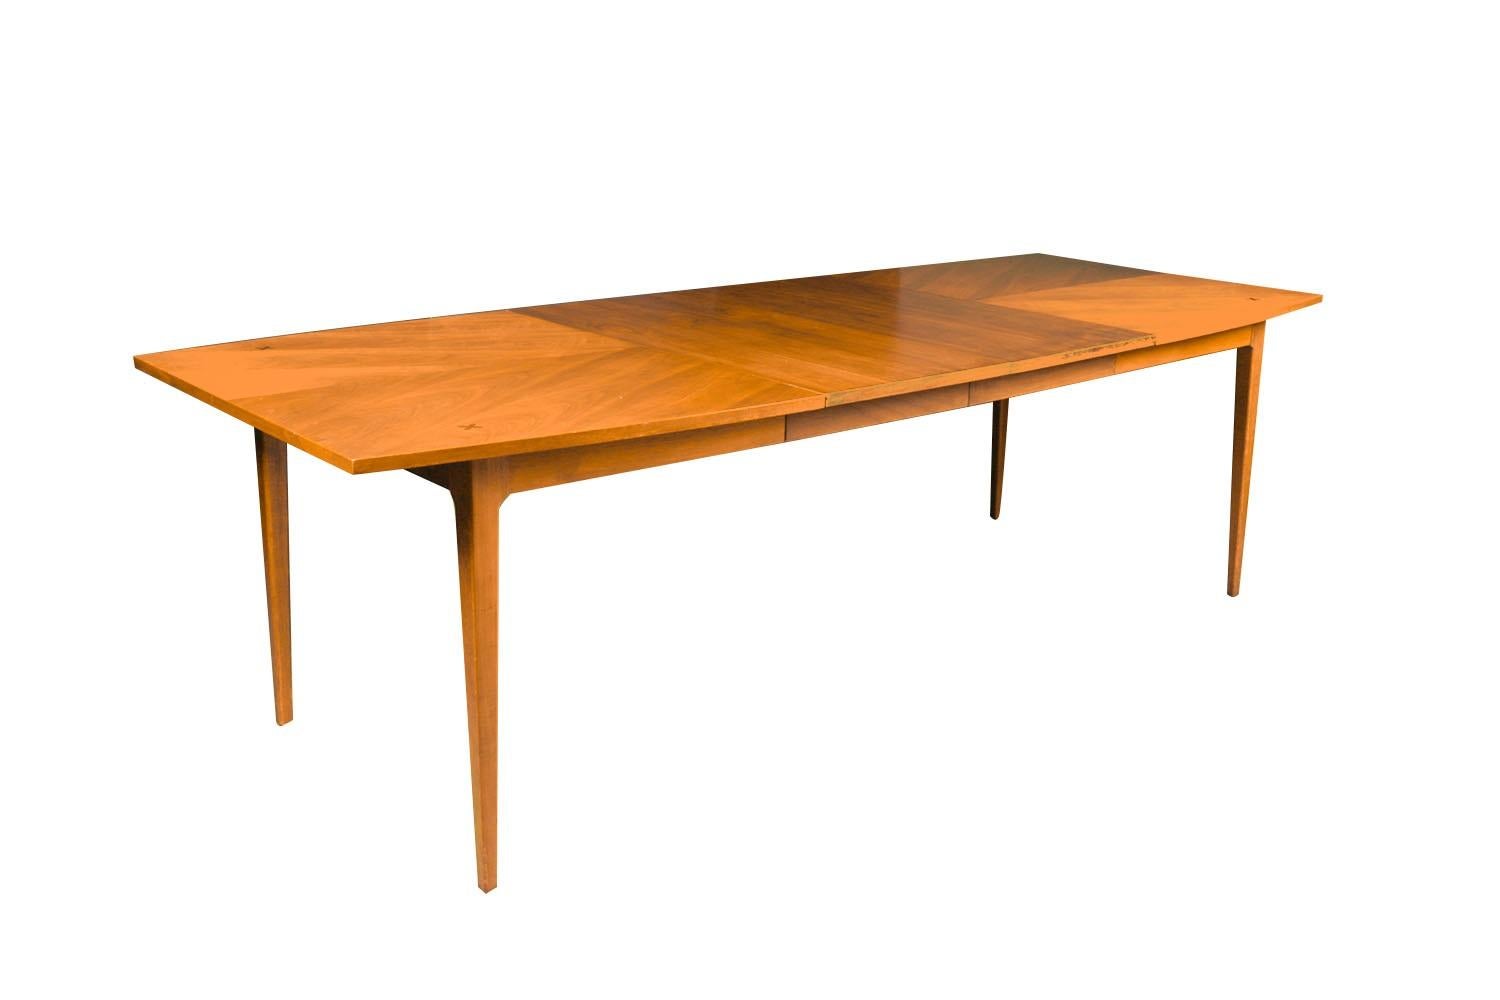 Stunning vintage Mid-Century Modern American of Martinsville walnut dining table in great original condition. Features a unique shaped sculpted top, accented with x-shaped rosewood star inlays adorning each of the four corners for a simple but